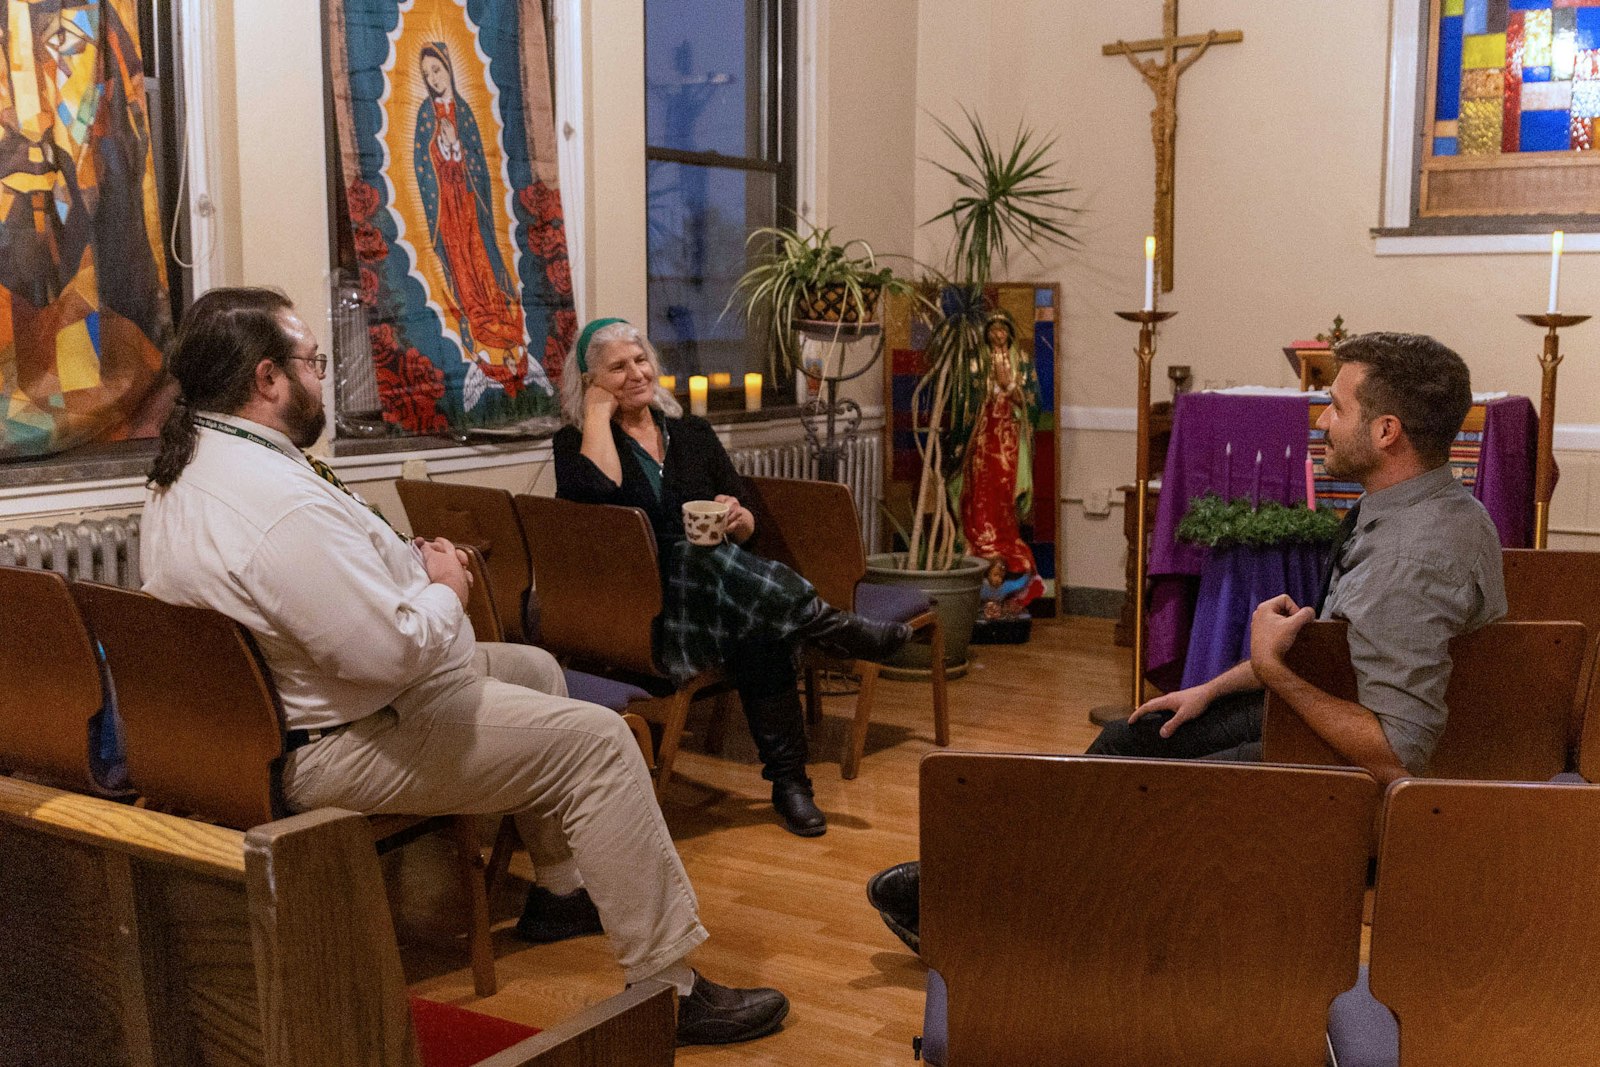 Artist Jeremy Alexander, right, speaks with campus minister Kim Redigan, center, and Latin teacher Jim Dwyer in the chapel of Detroit Cristo Rey High School in southwest Detroit. The chapel is open to students and staff to pray throughout the school day.